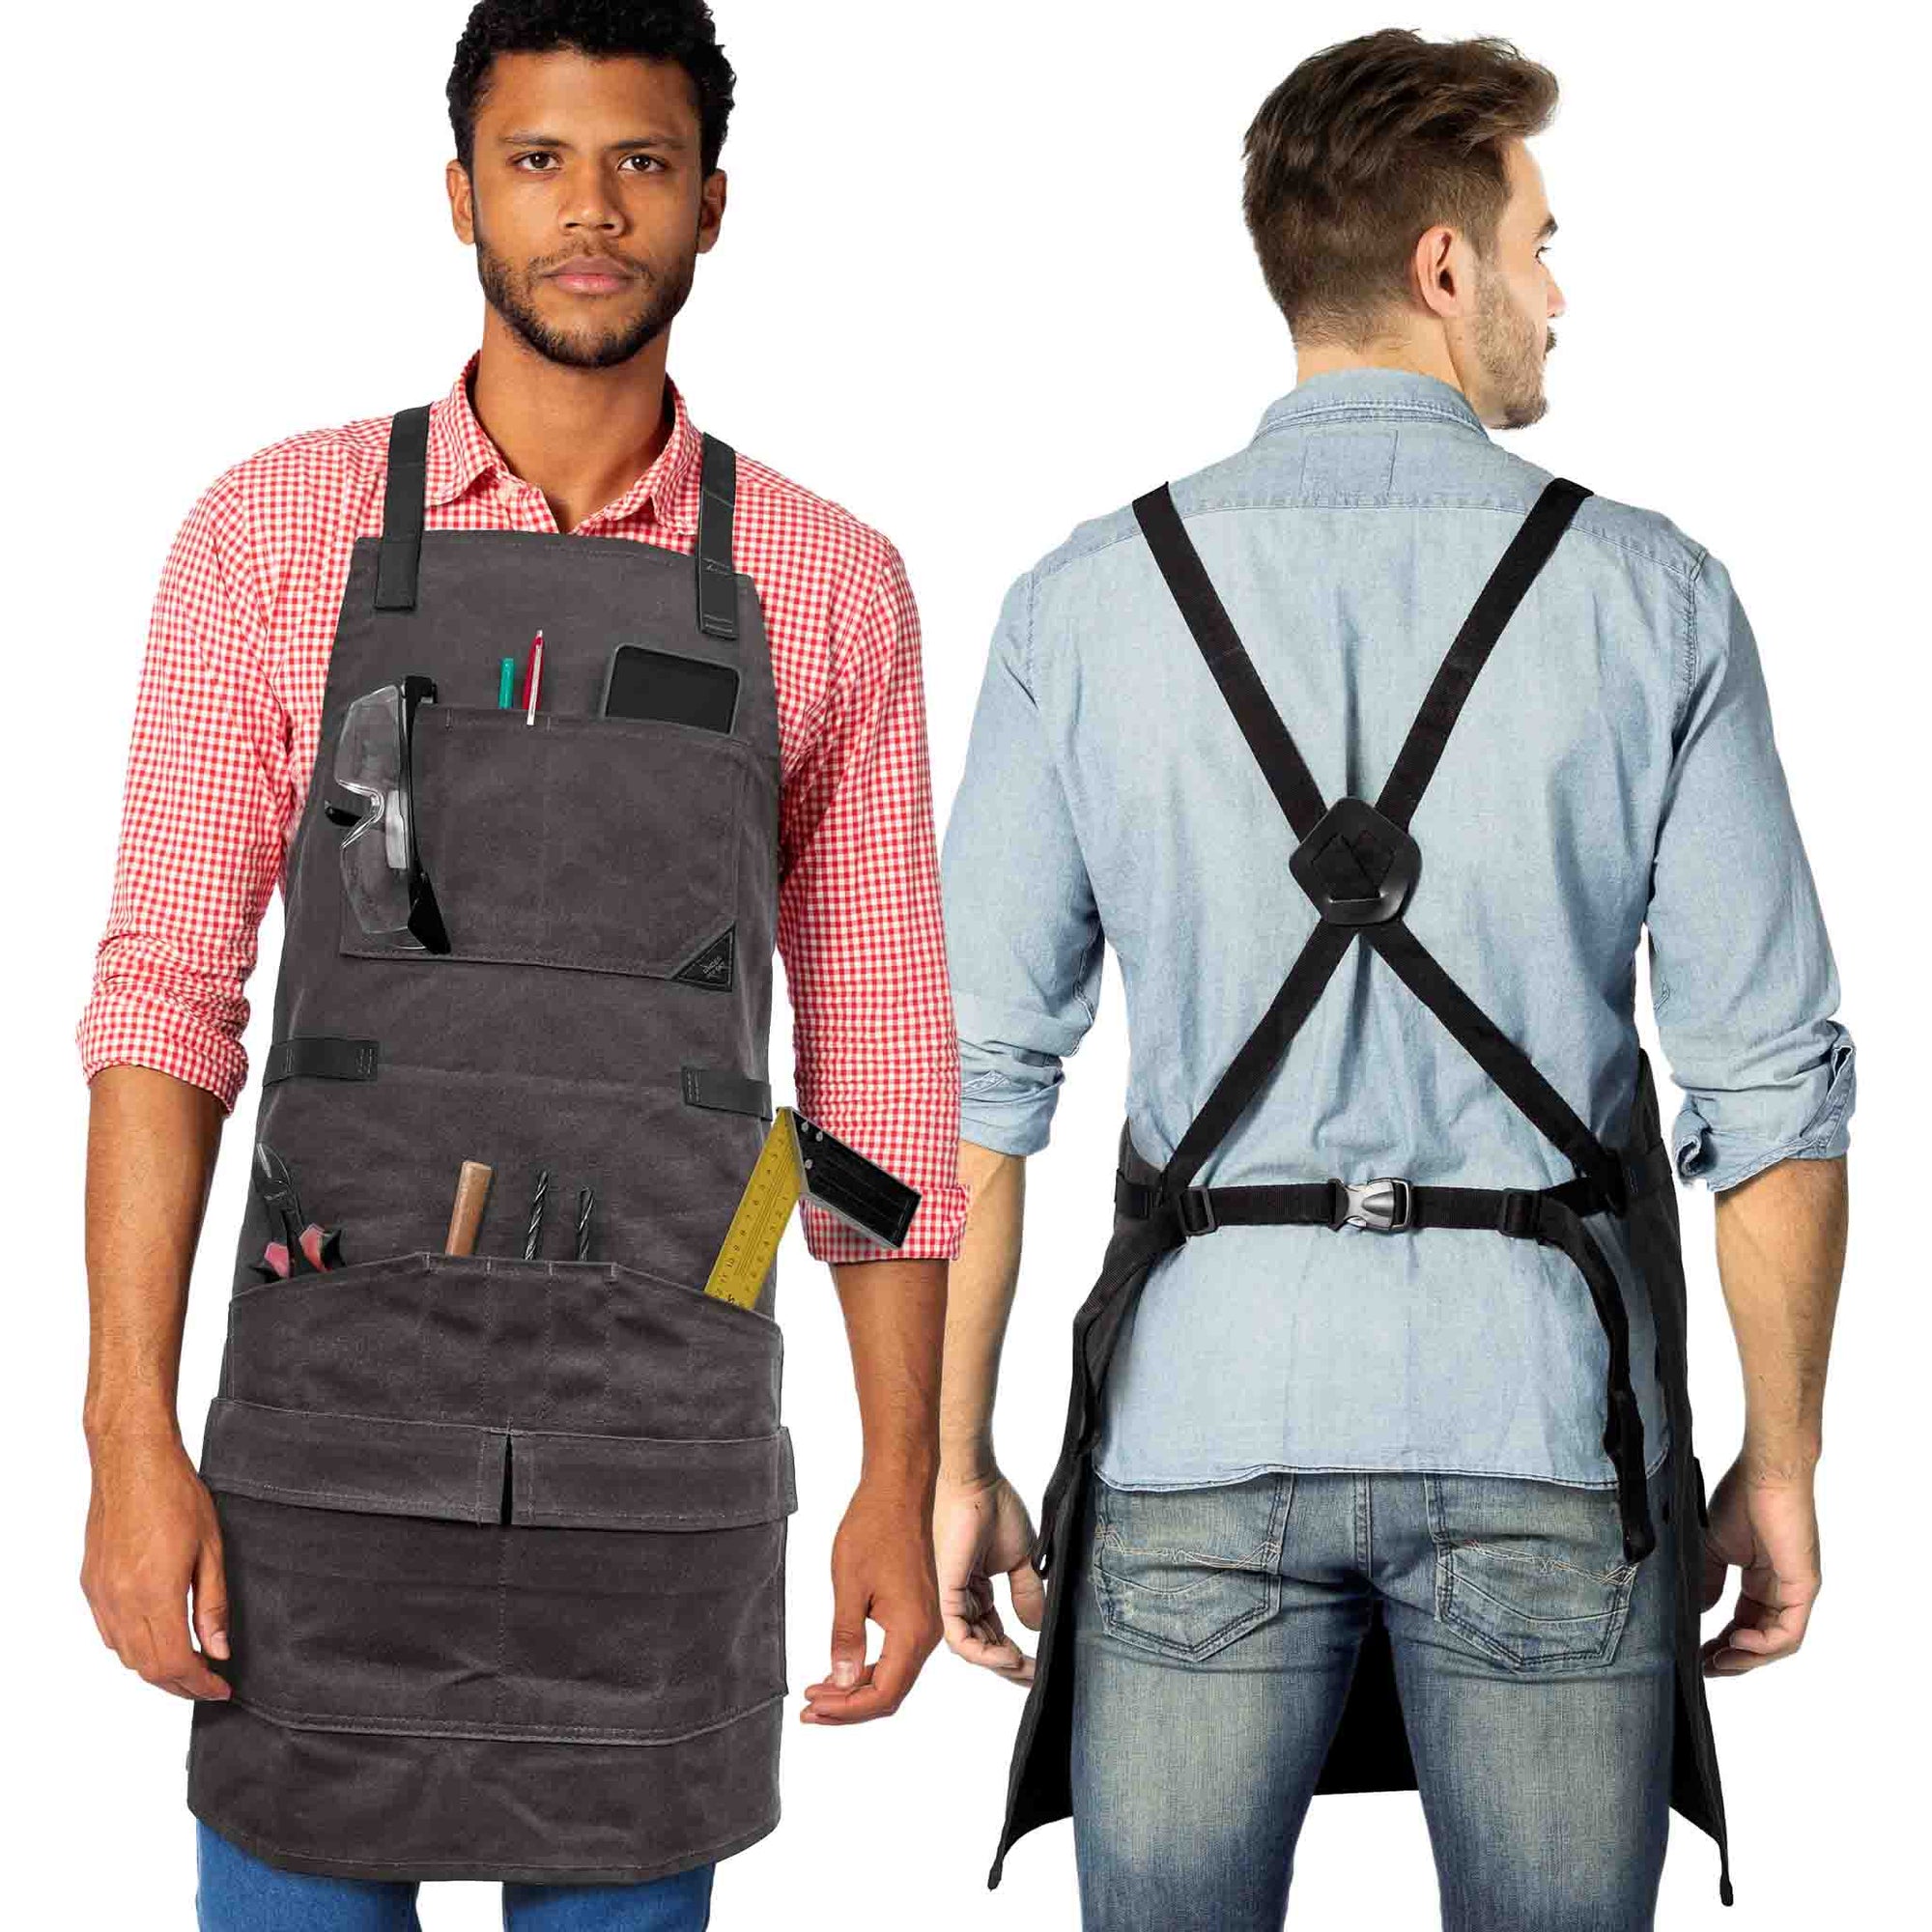 Woodwork Apron - 12 pockets & loops, Waxed Canvas, Cross-Back, Leather Reinforcement - Carpenter, Workshop, Tool - Under Ny Sky